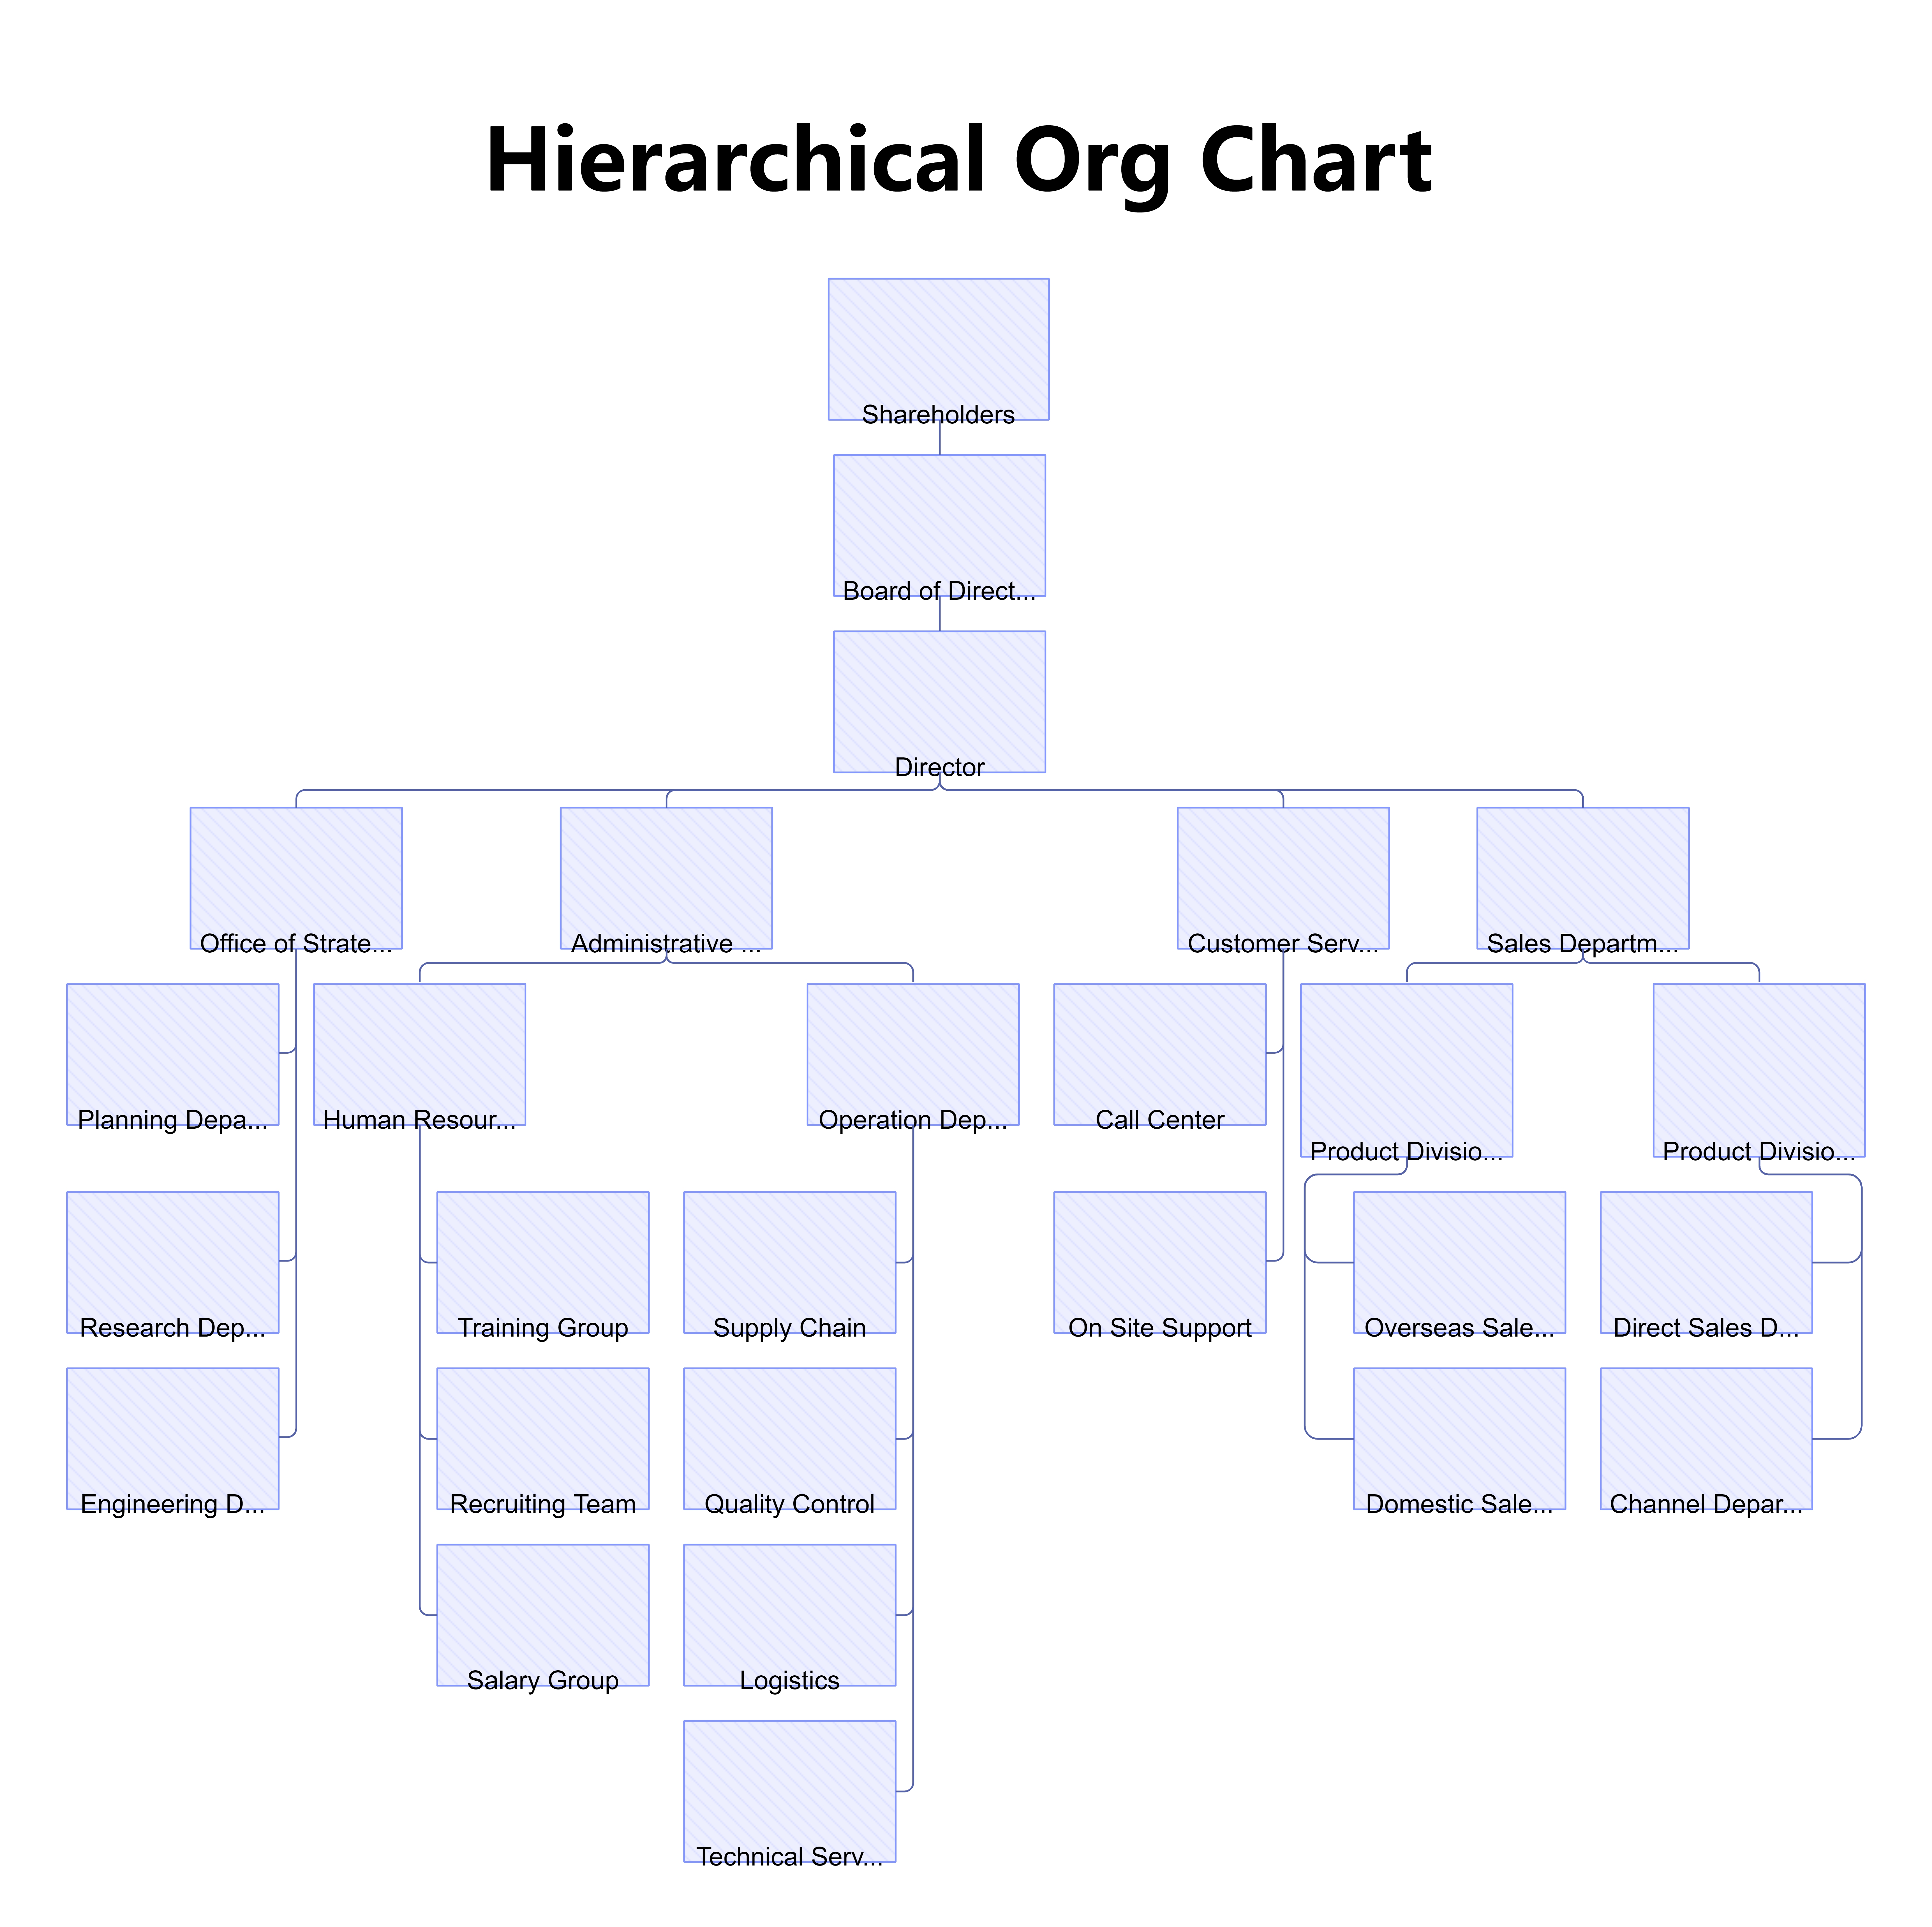 Hierarchical Org Chart